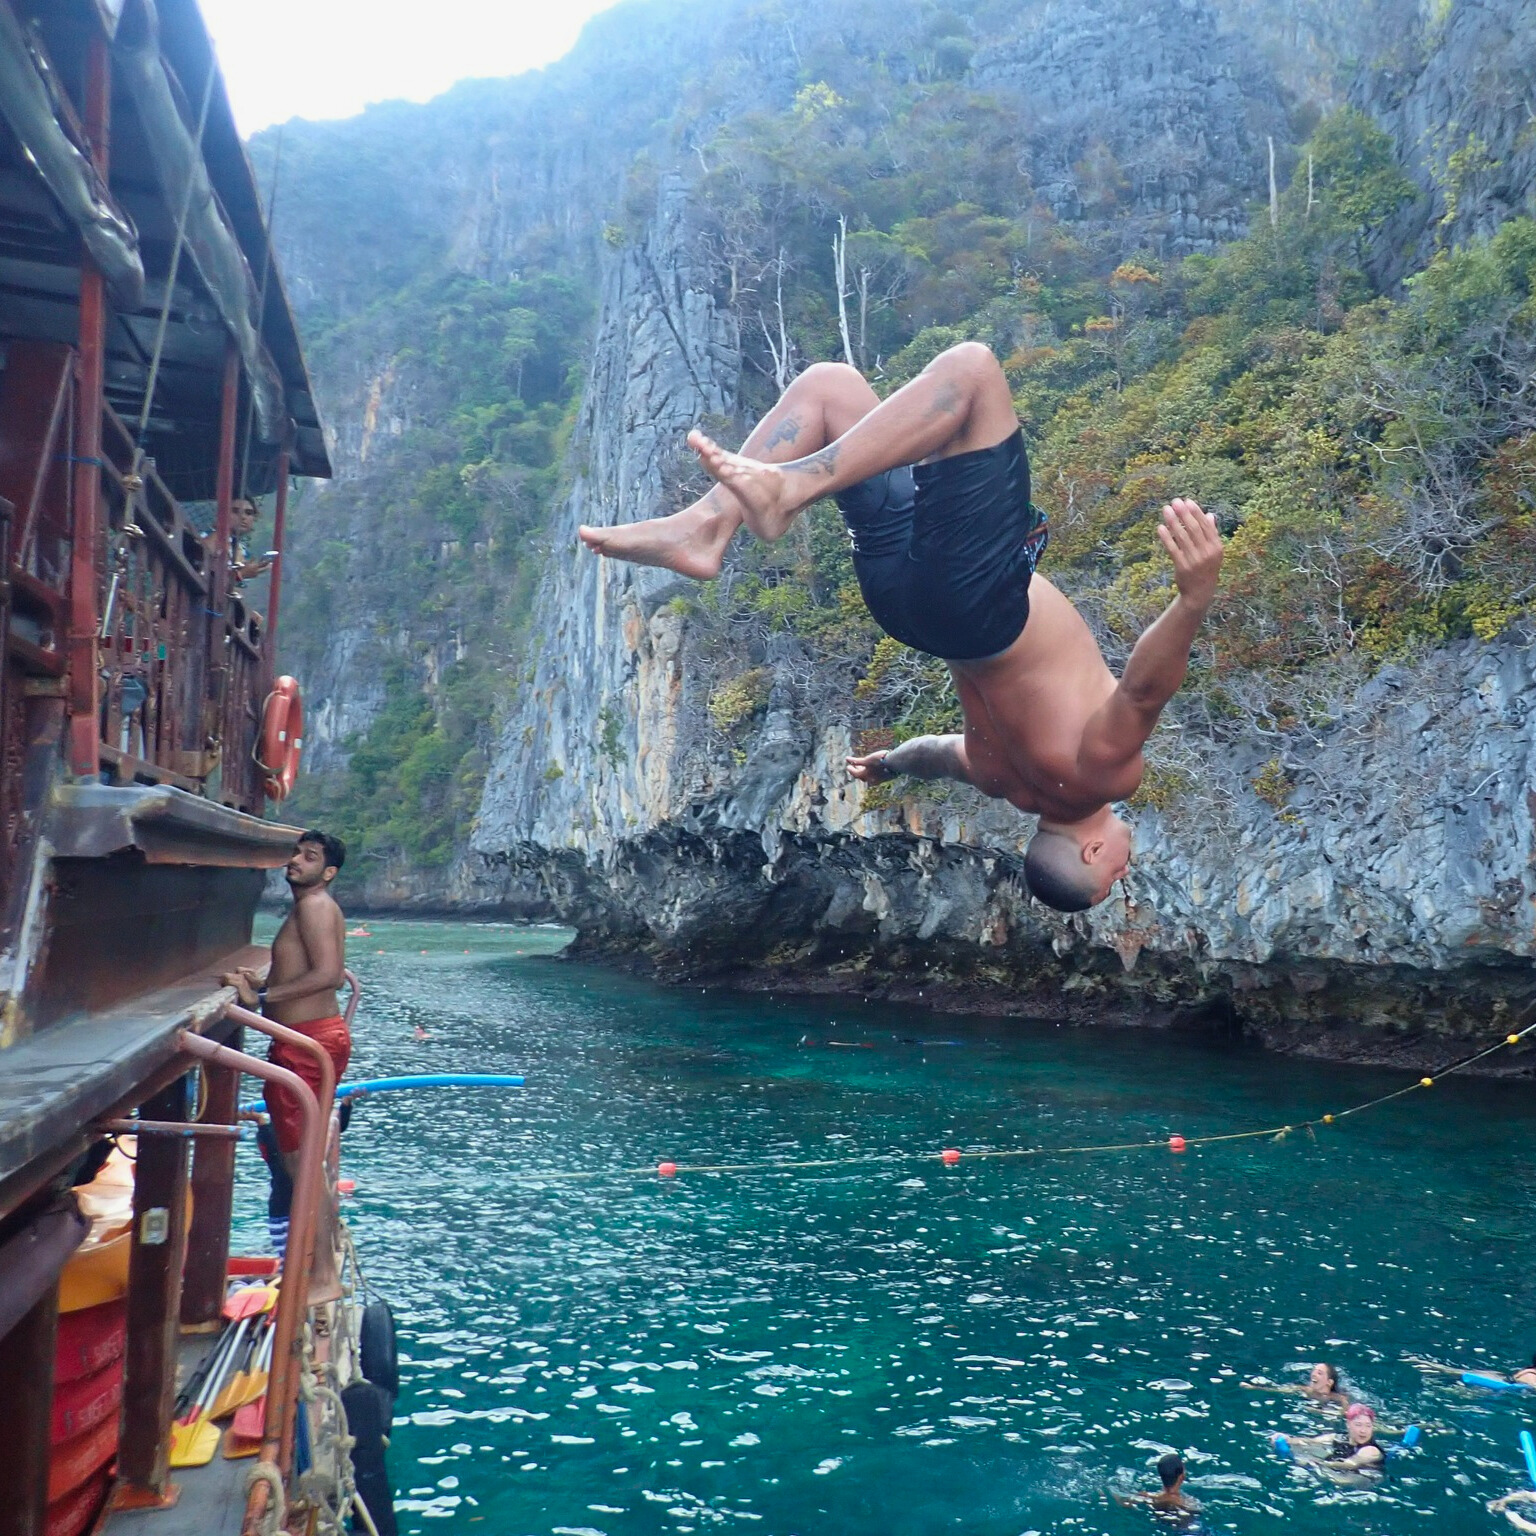 activities on the phi phi island tour include diving from the boat